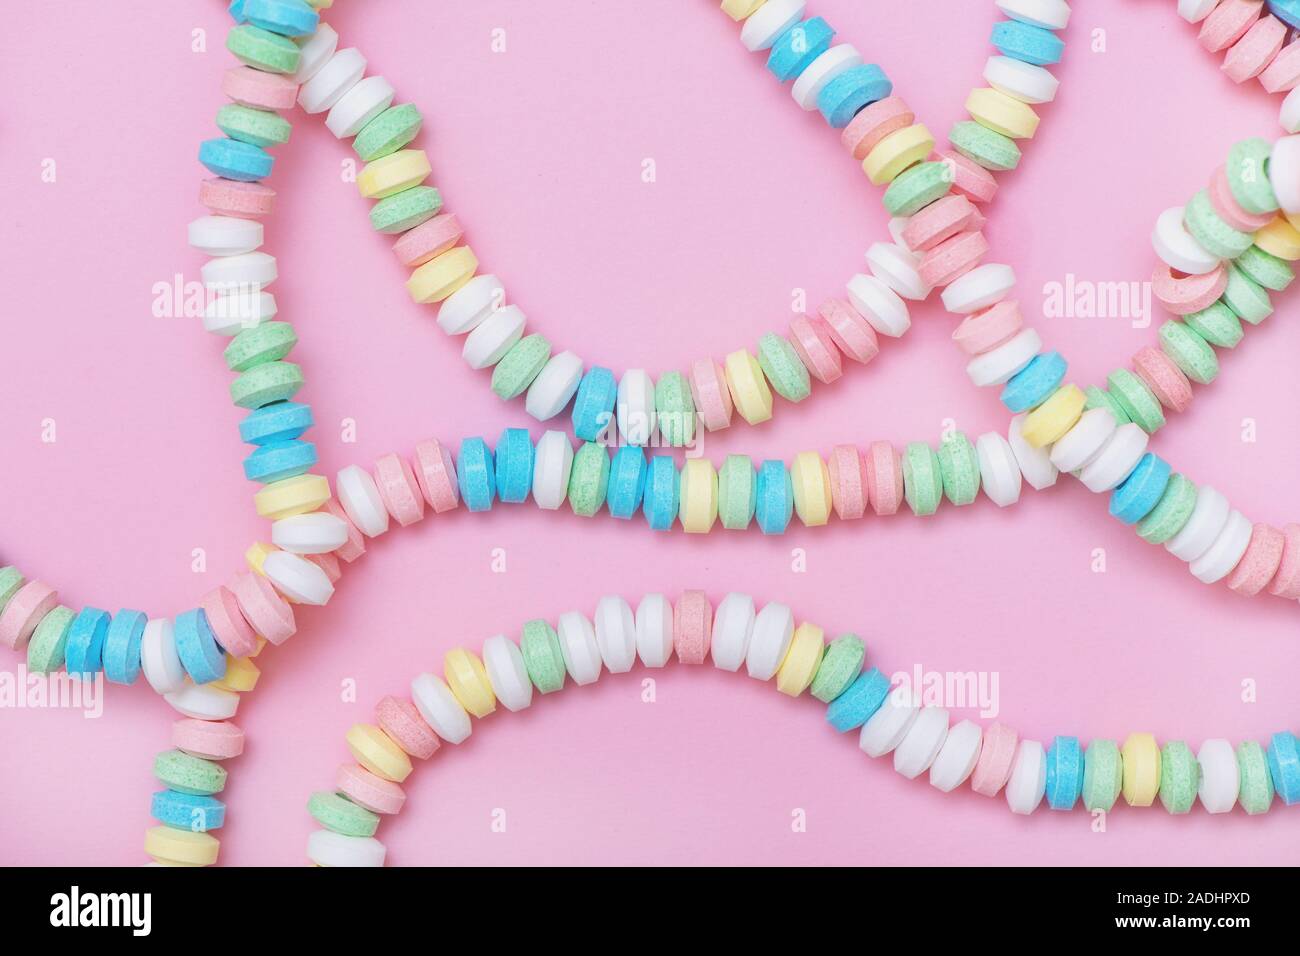 Candy necklace on pink pastel colored background. Top view. Stock Photo